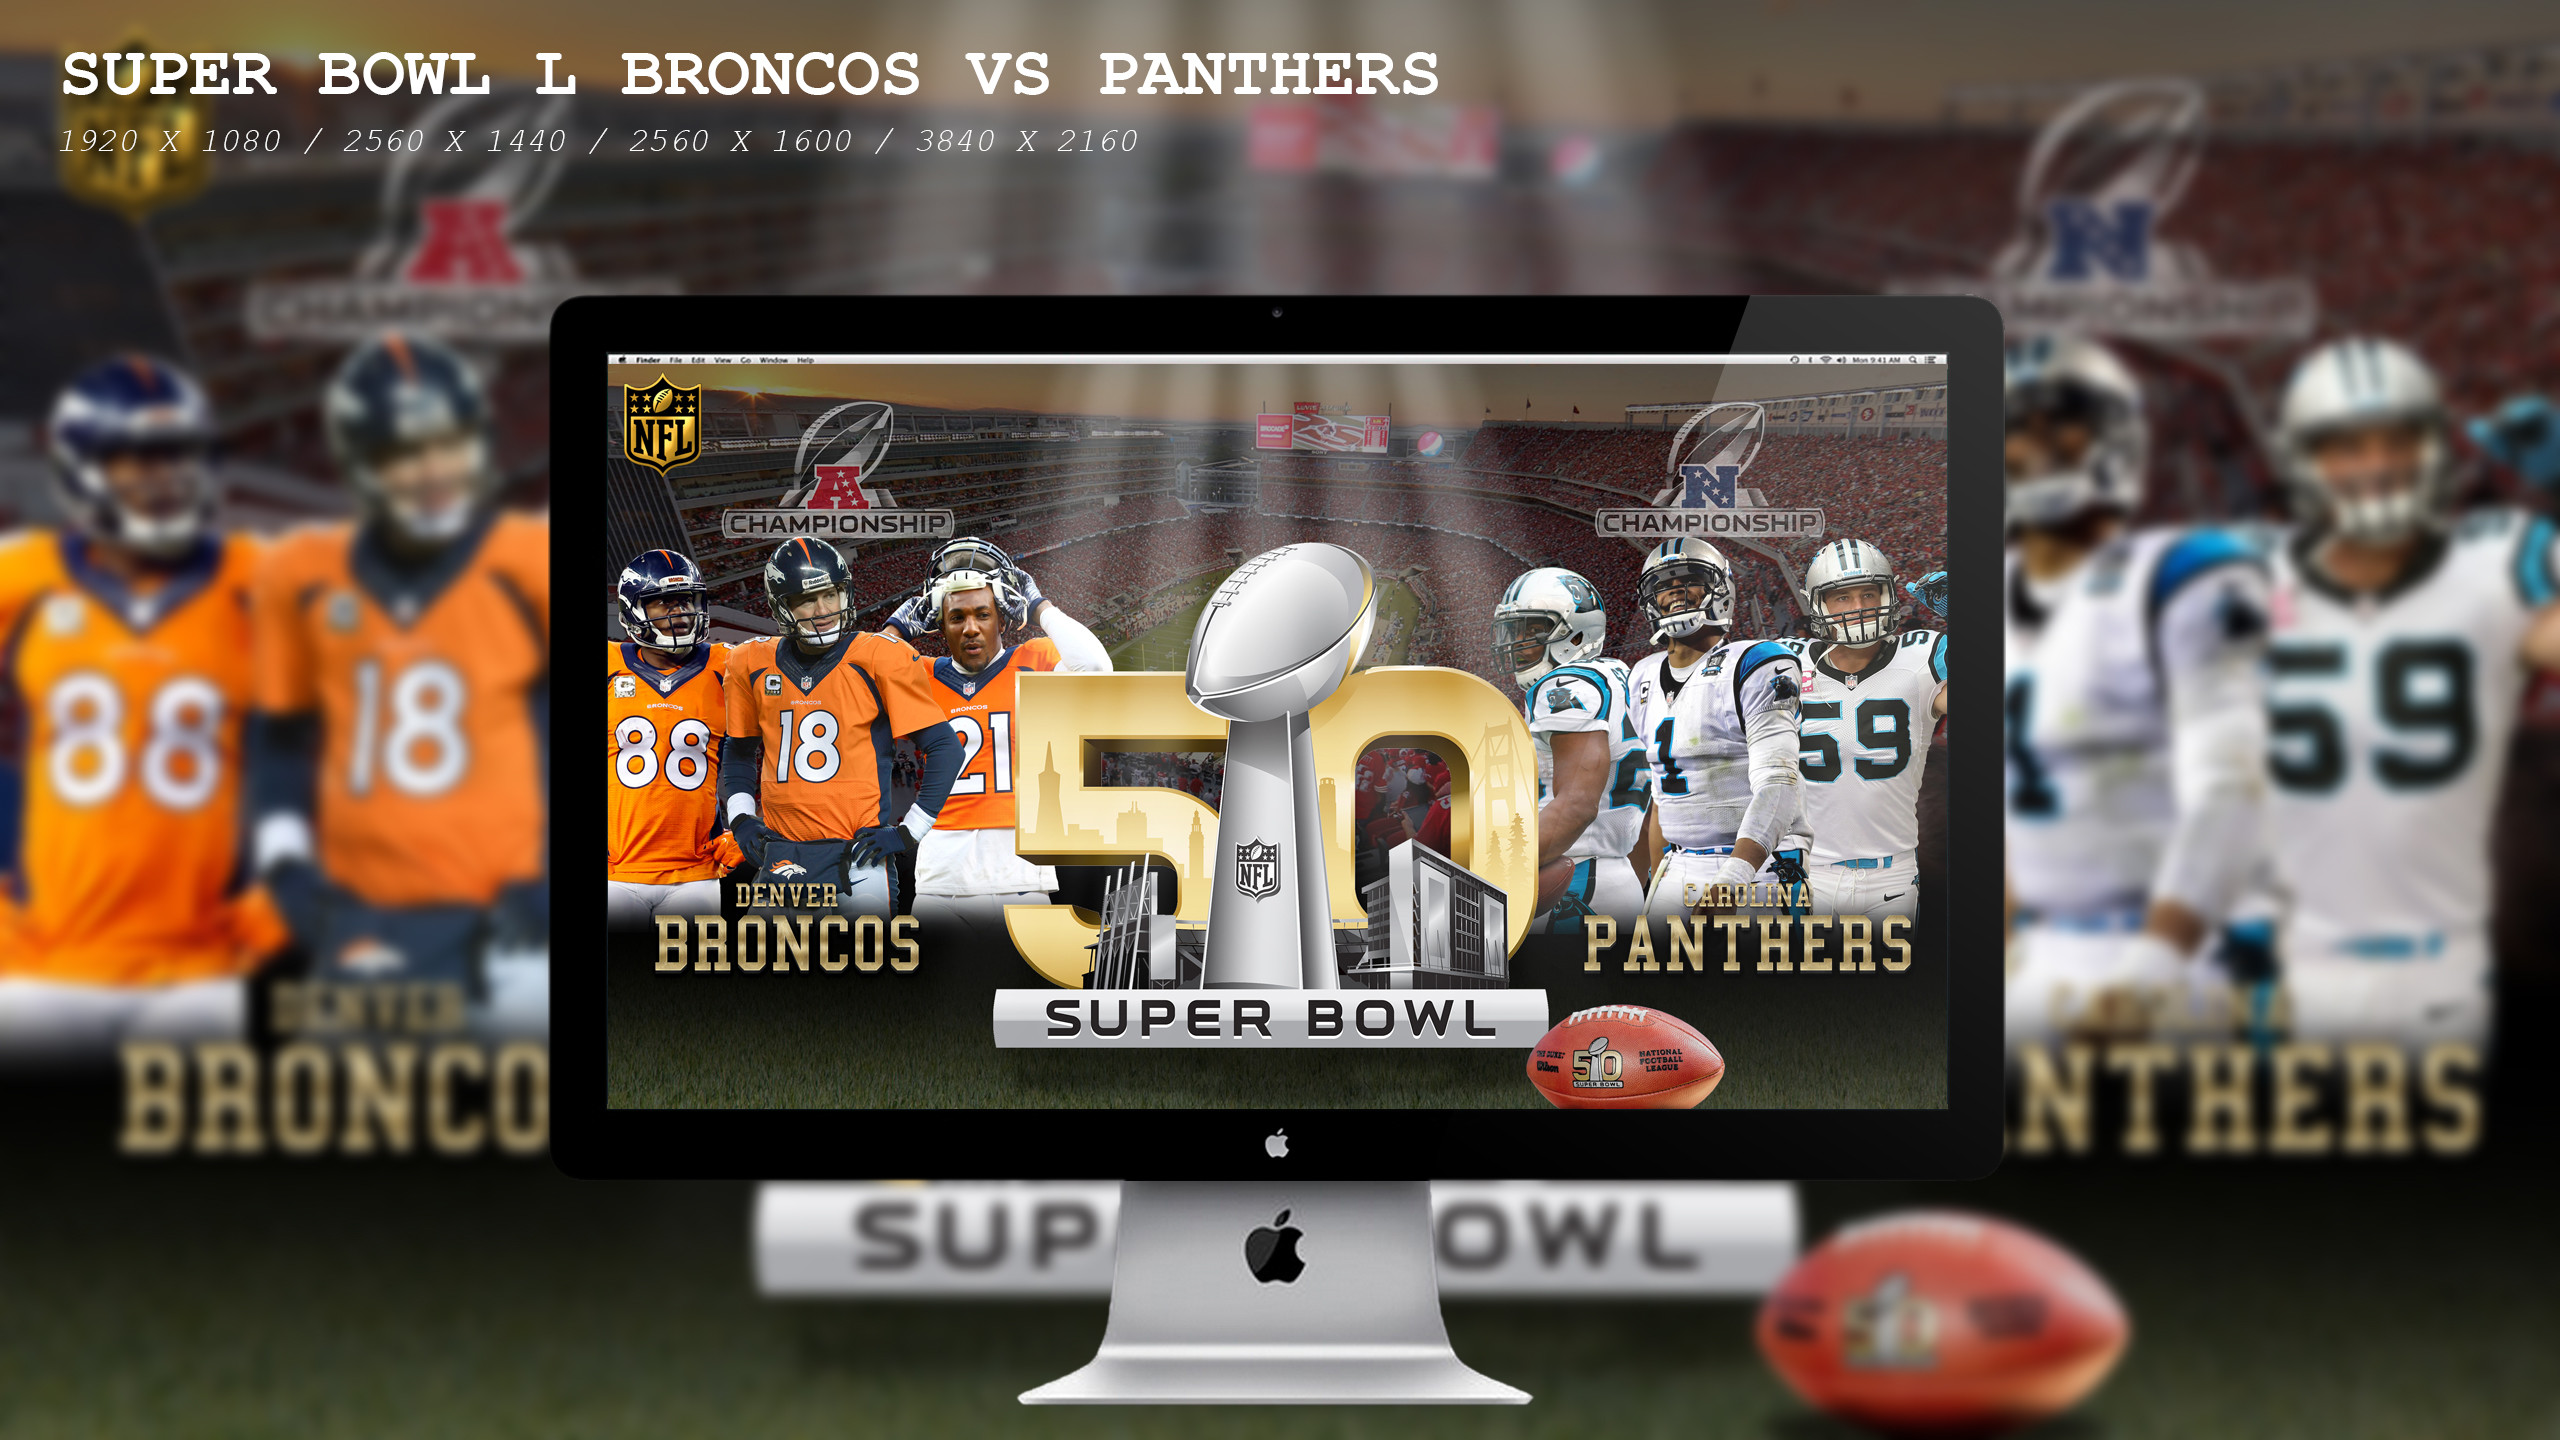 2560x1440 Broncos Super Bowl Wallpapers by Stephanie Armstrong #7